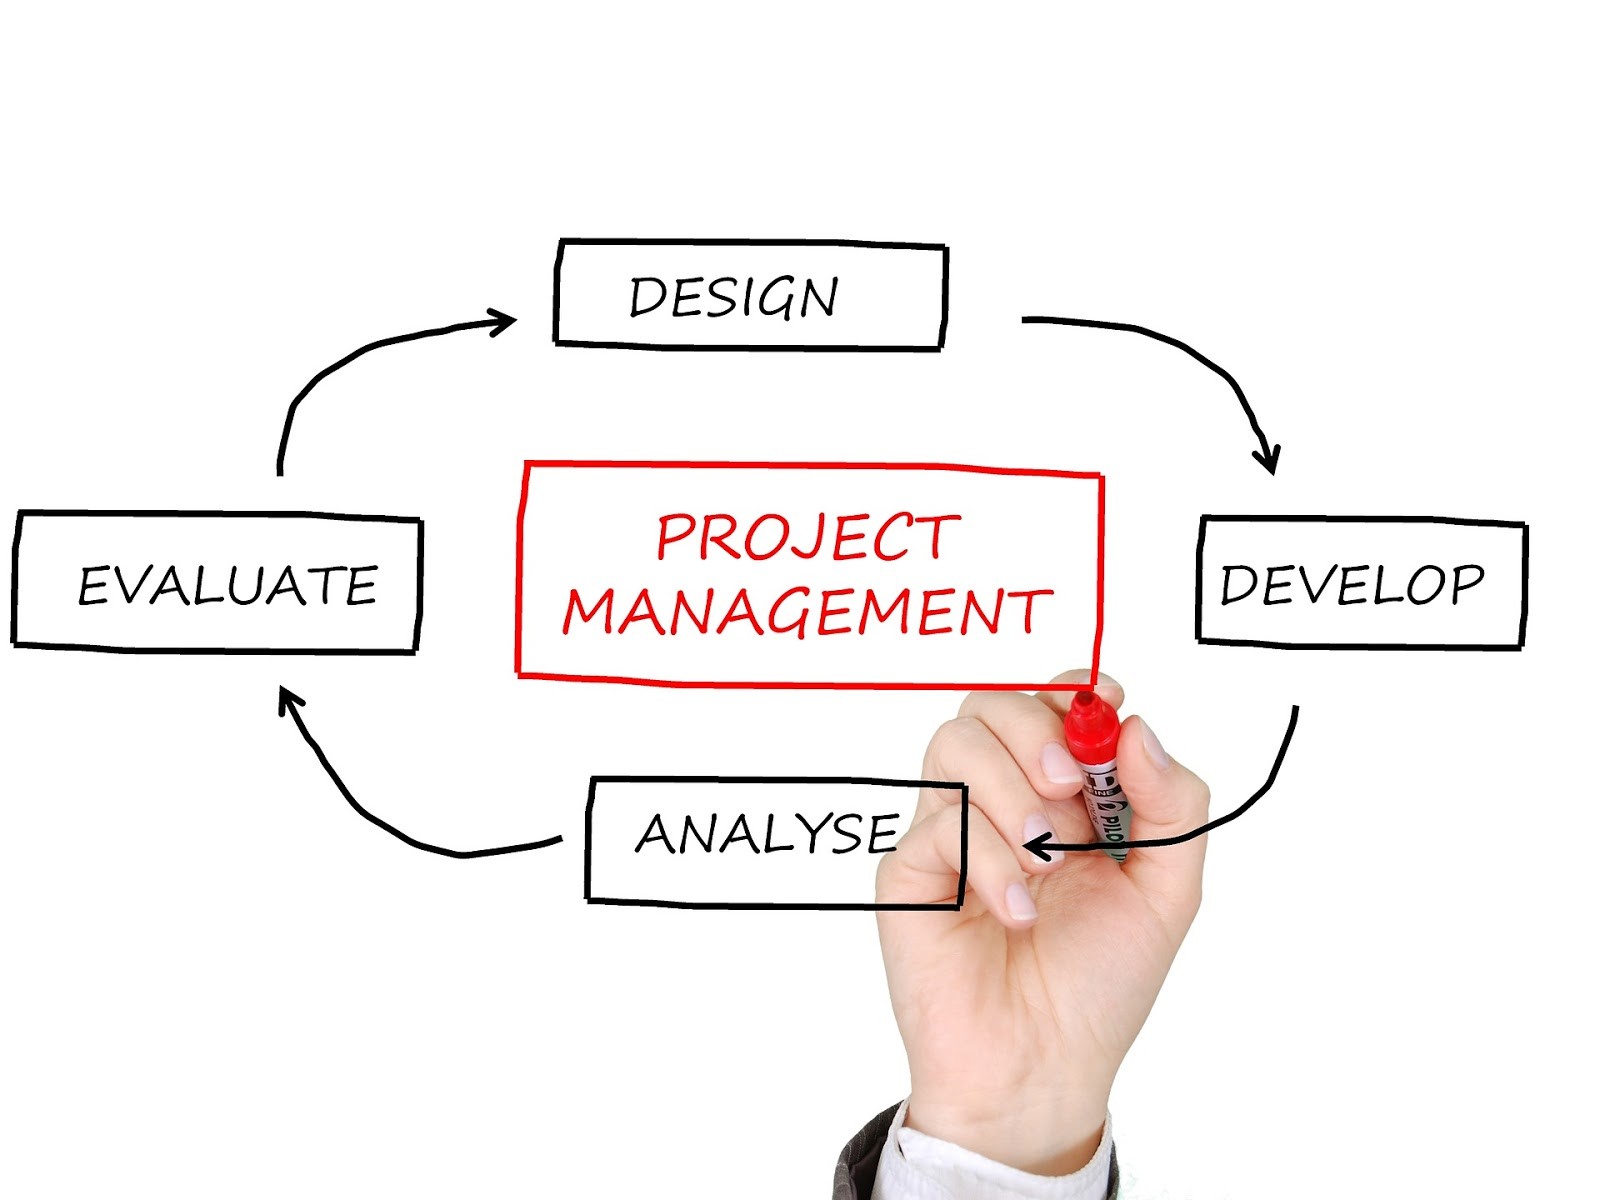 The benefits of agile project management apply to software and non-software pursuits